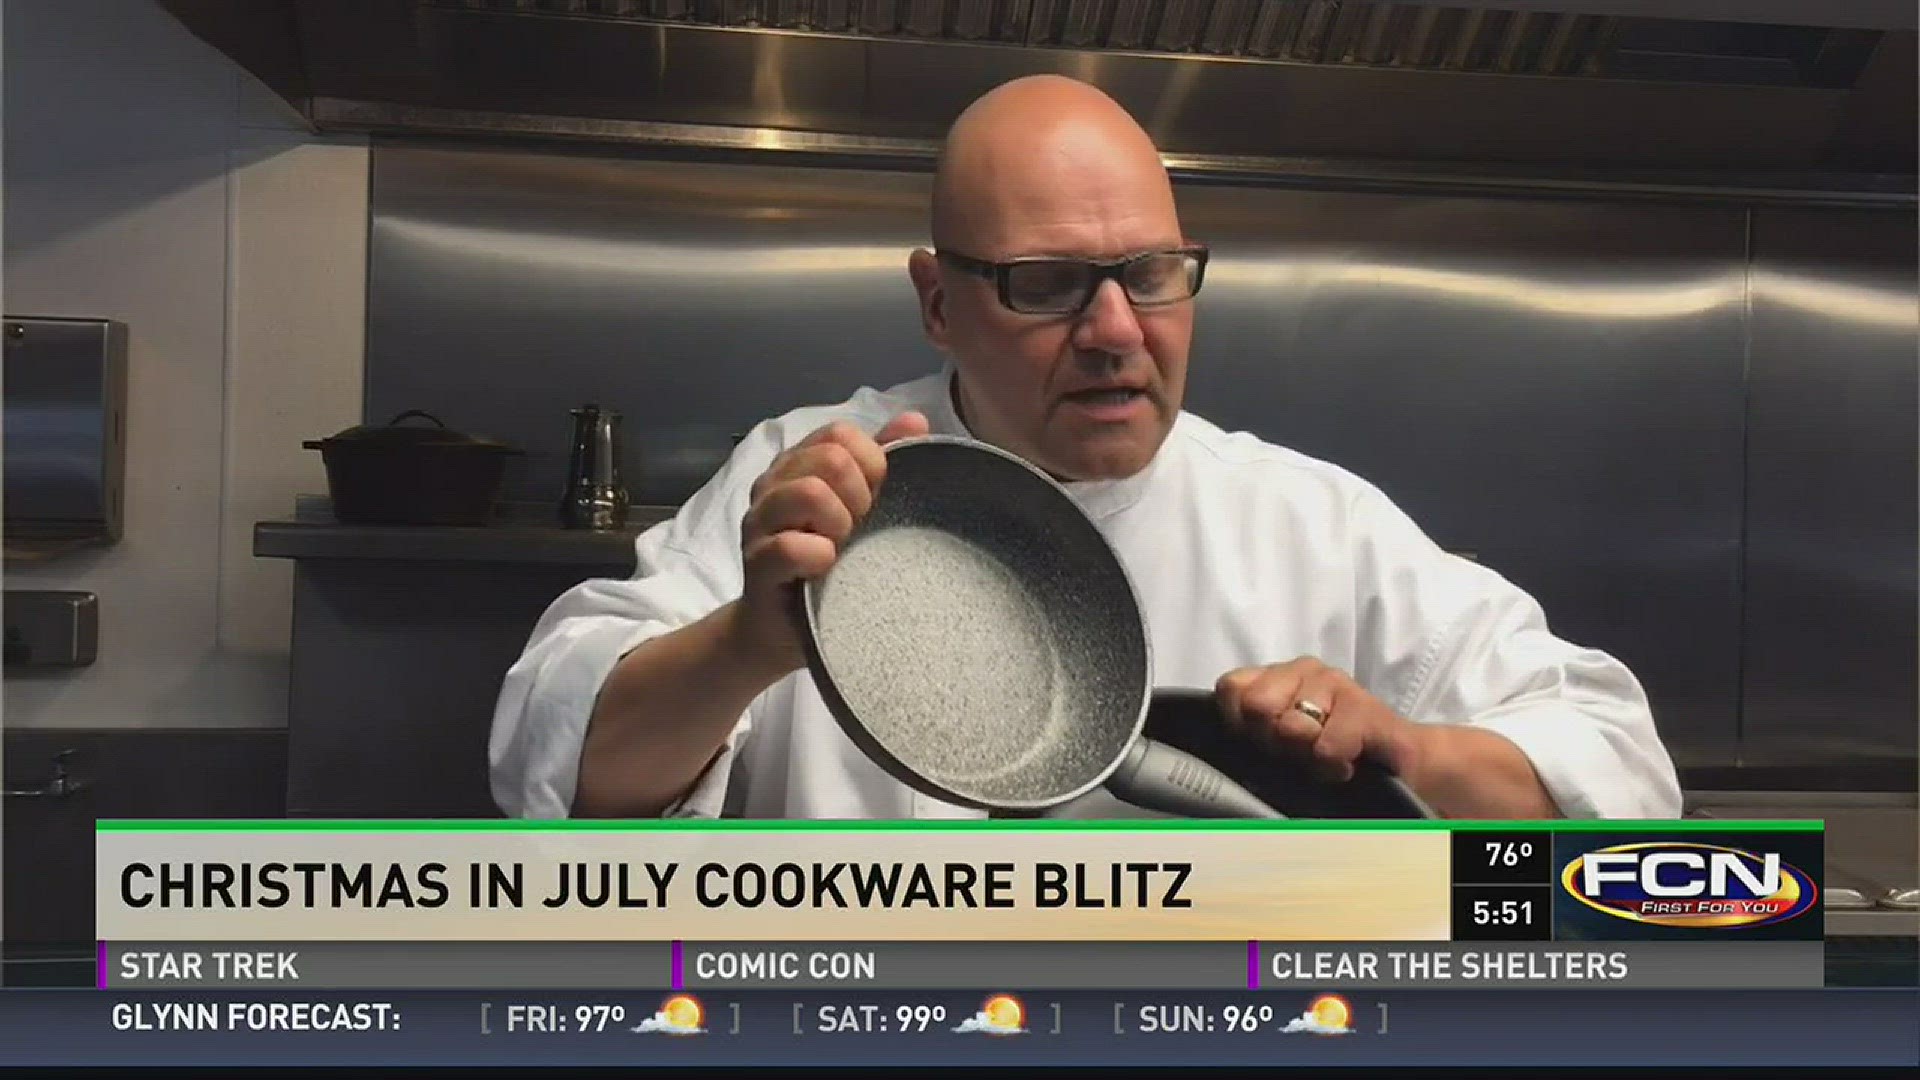 Christmas in July cookware blitz